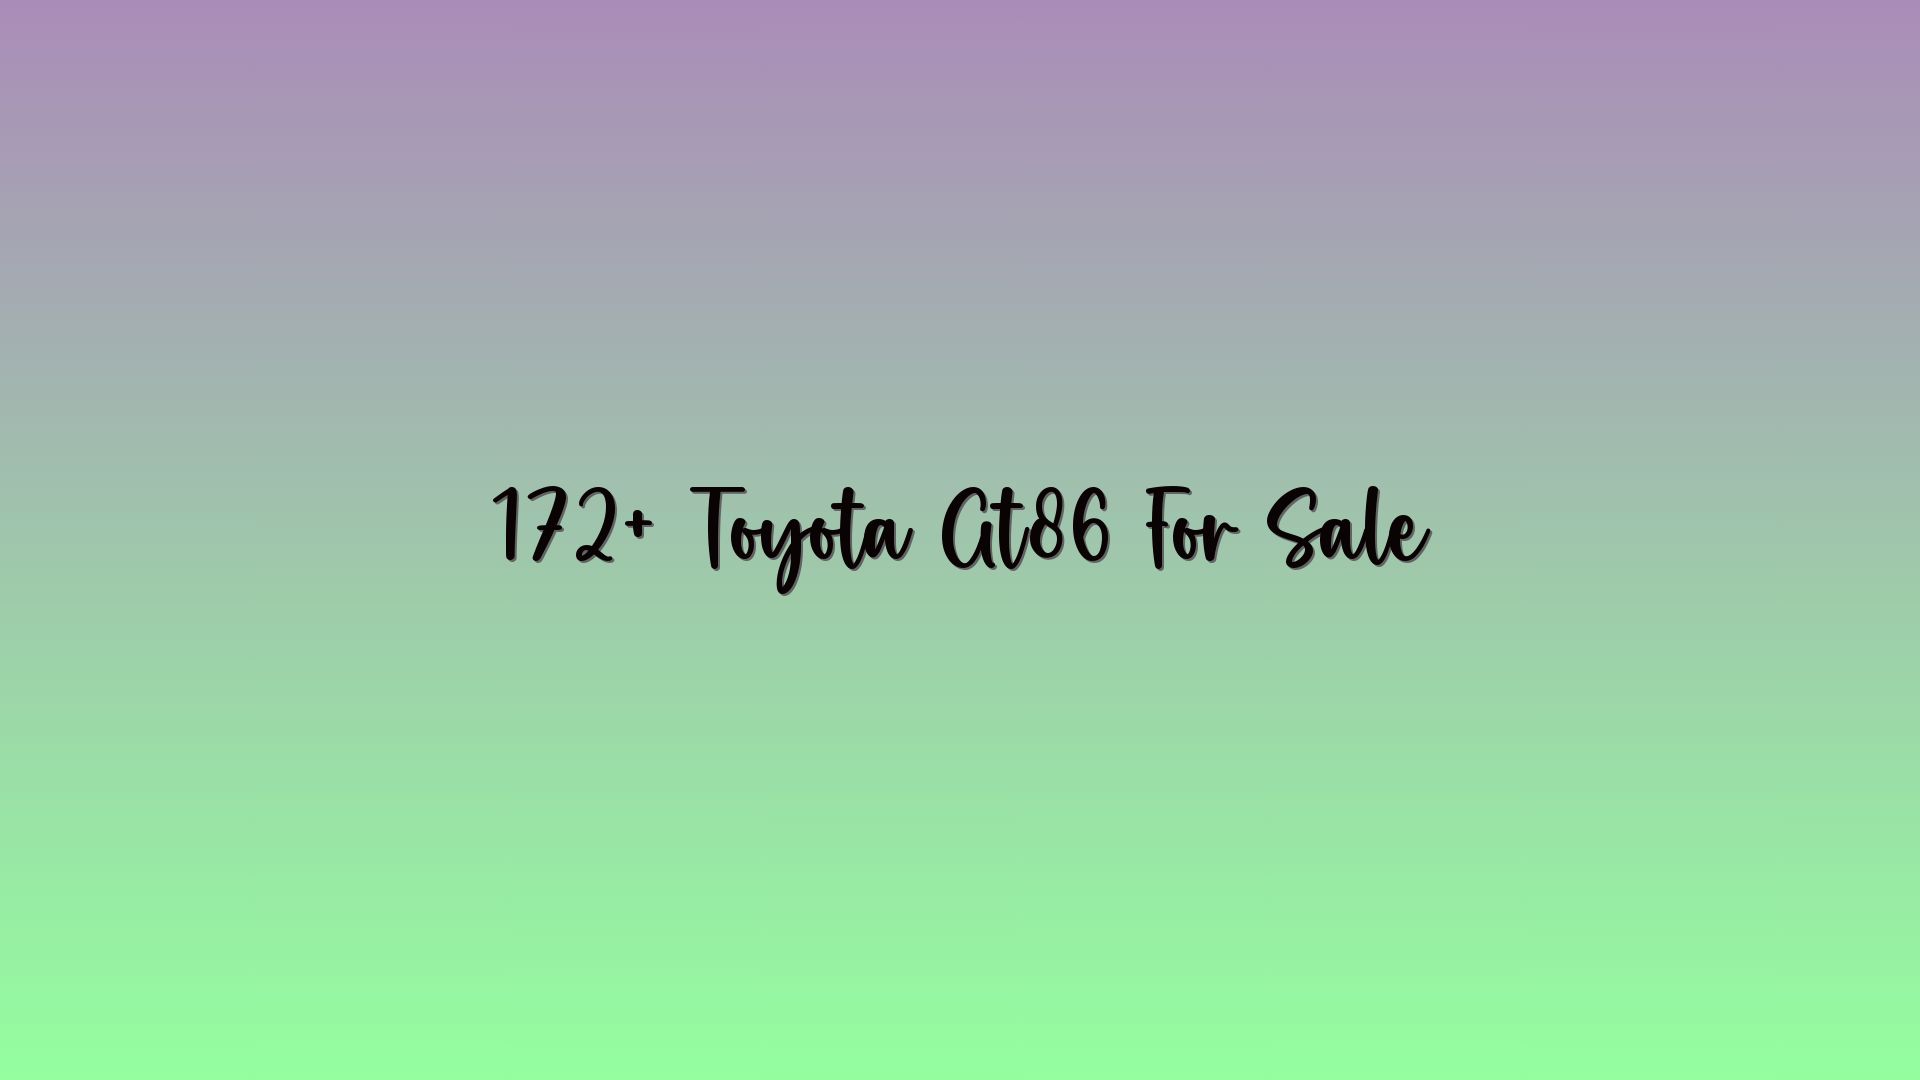 172+ Toyota Gt86 For Sale